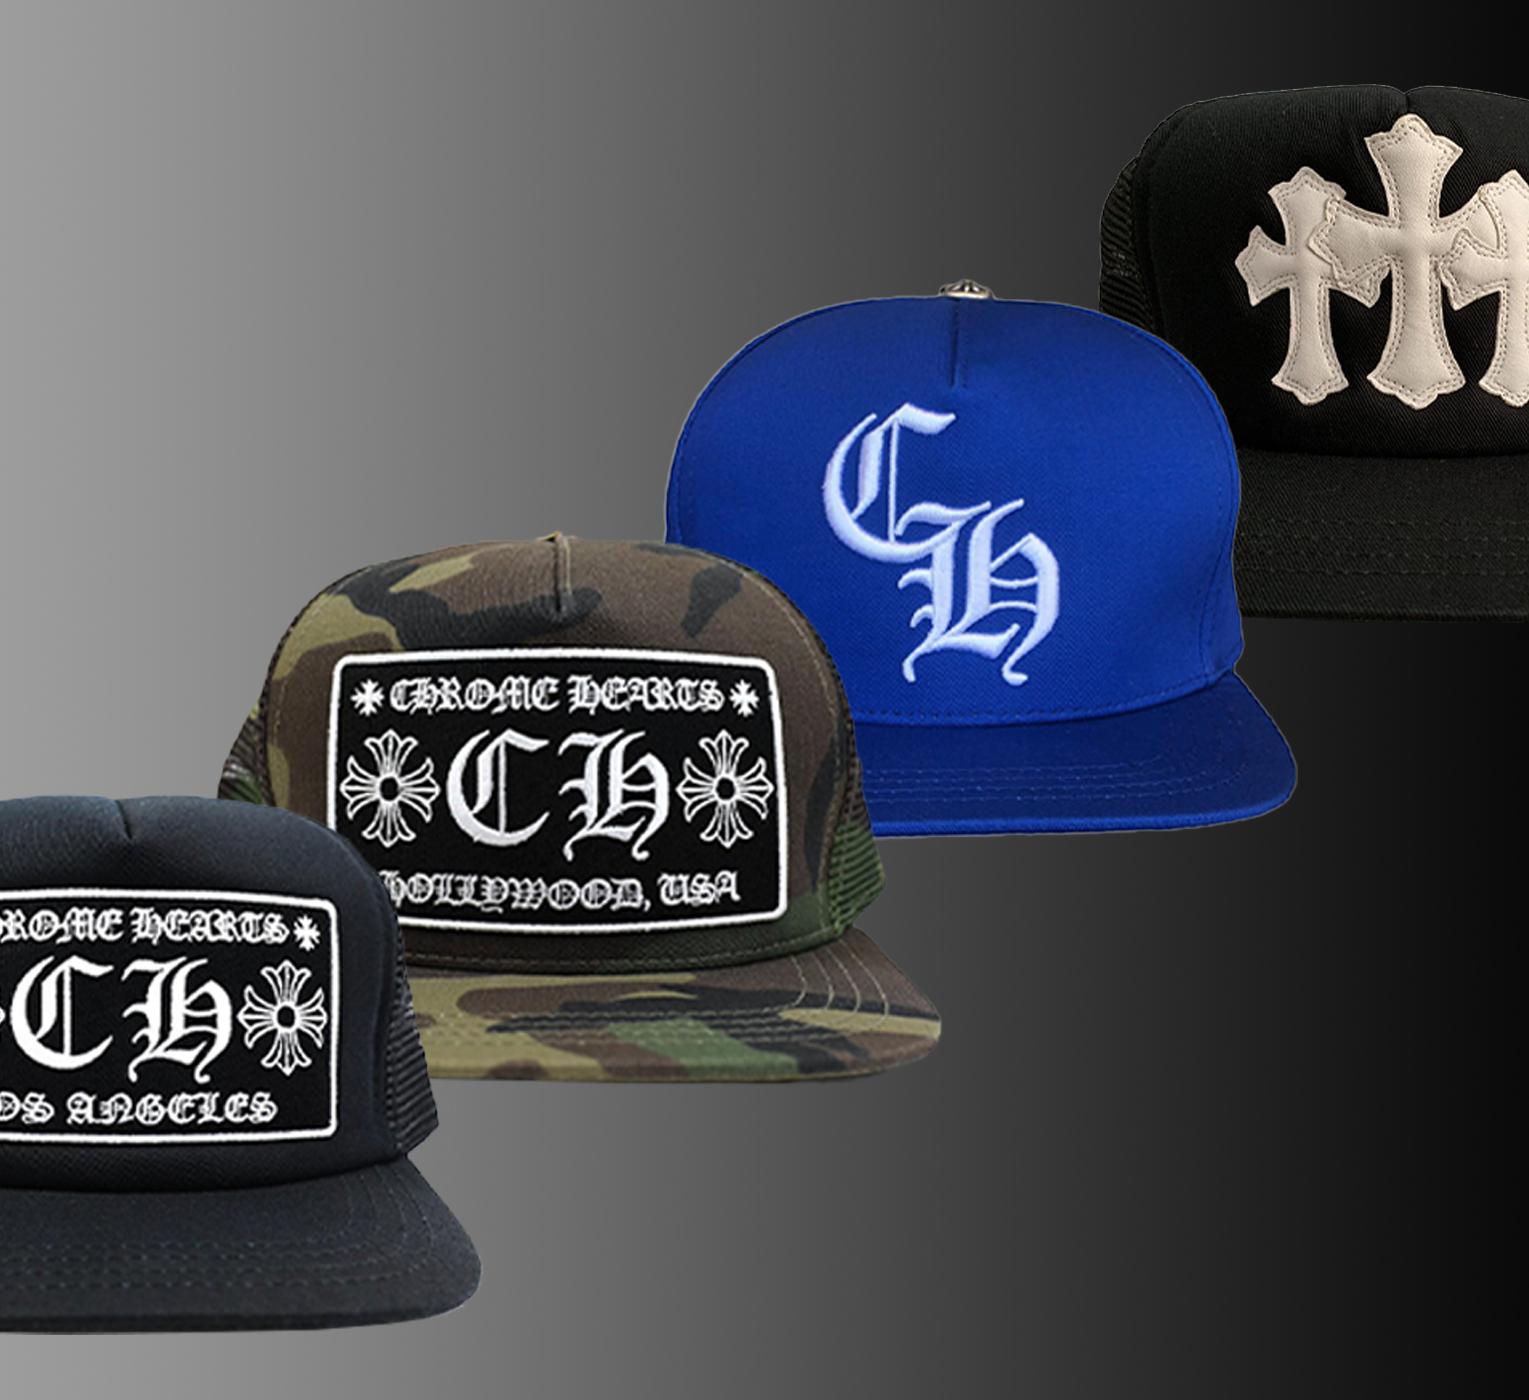 The Best Chrome Hearts Hats - StockX News